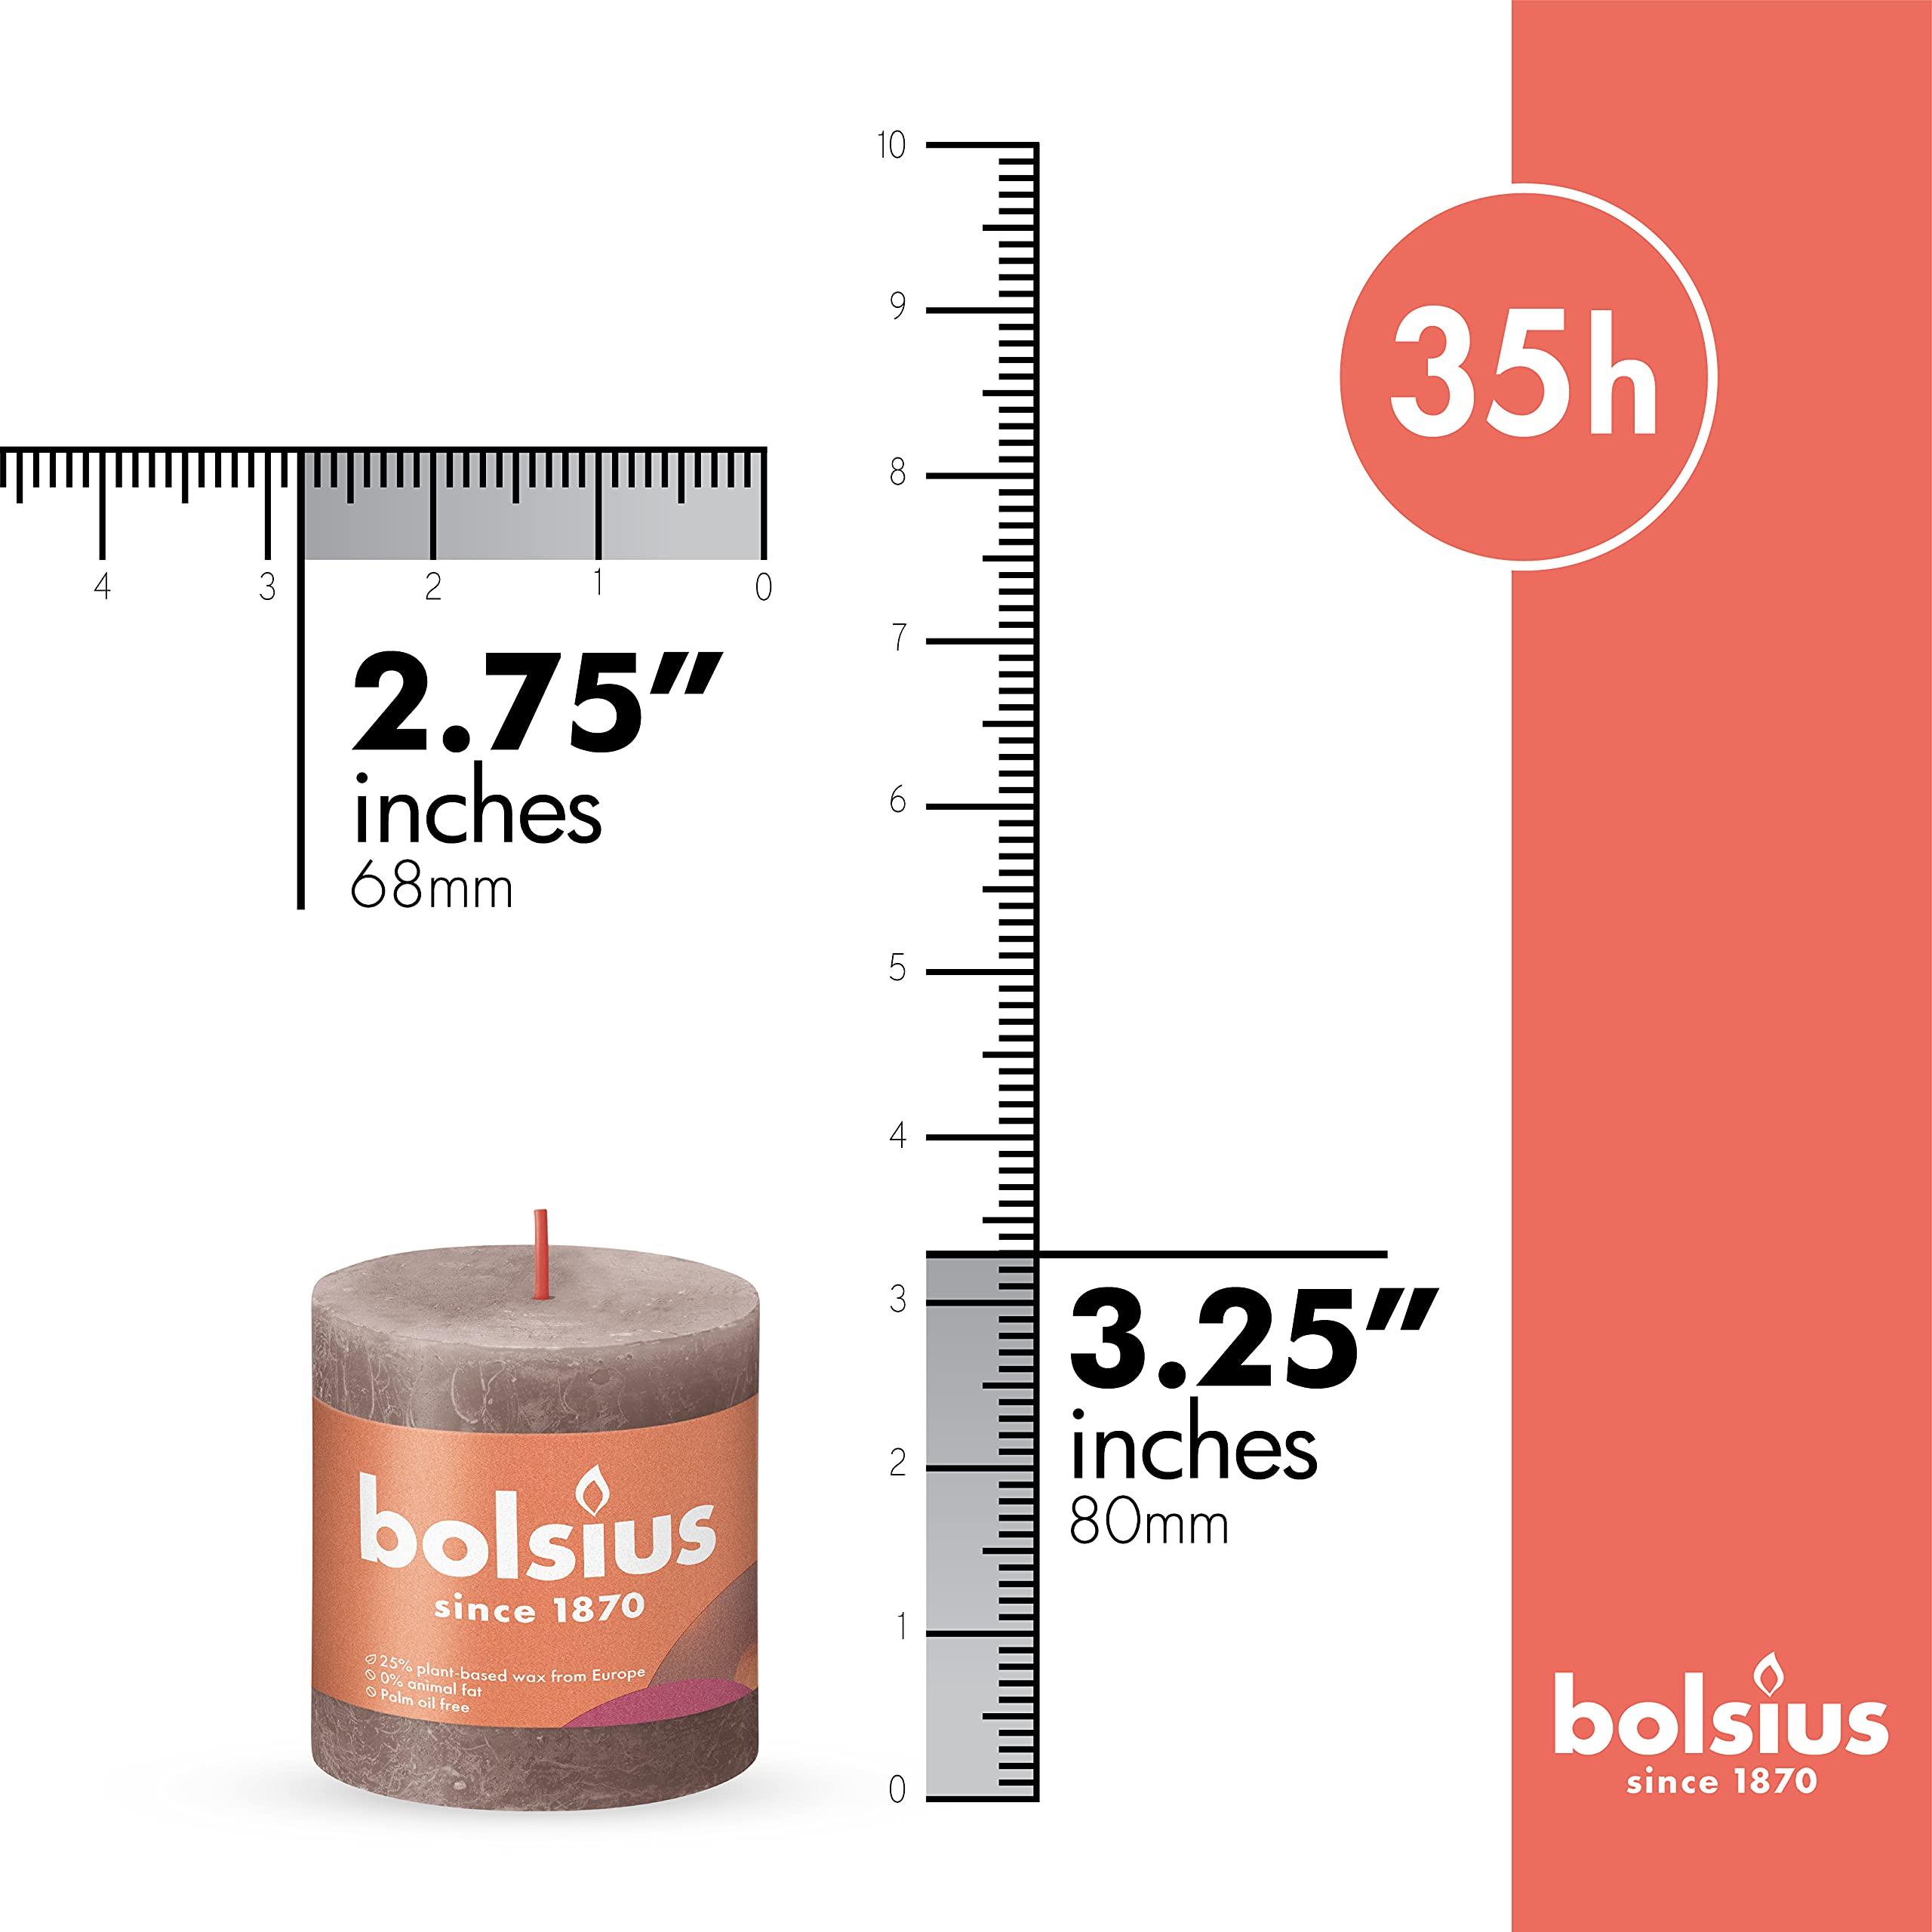 BOLSIUS 4 Pack Taupe Rustic Pillar Candles - 2.75 X 3.25 Inches - Premium European Quality - Includes Natural Plant-Based Wax - Unscented Dripless Smokeless 35 Hour Party and Wedding Candles  - Very Good